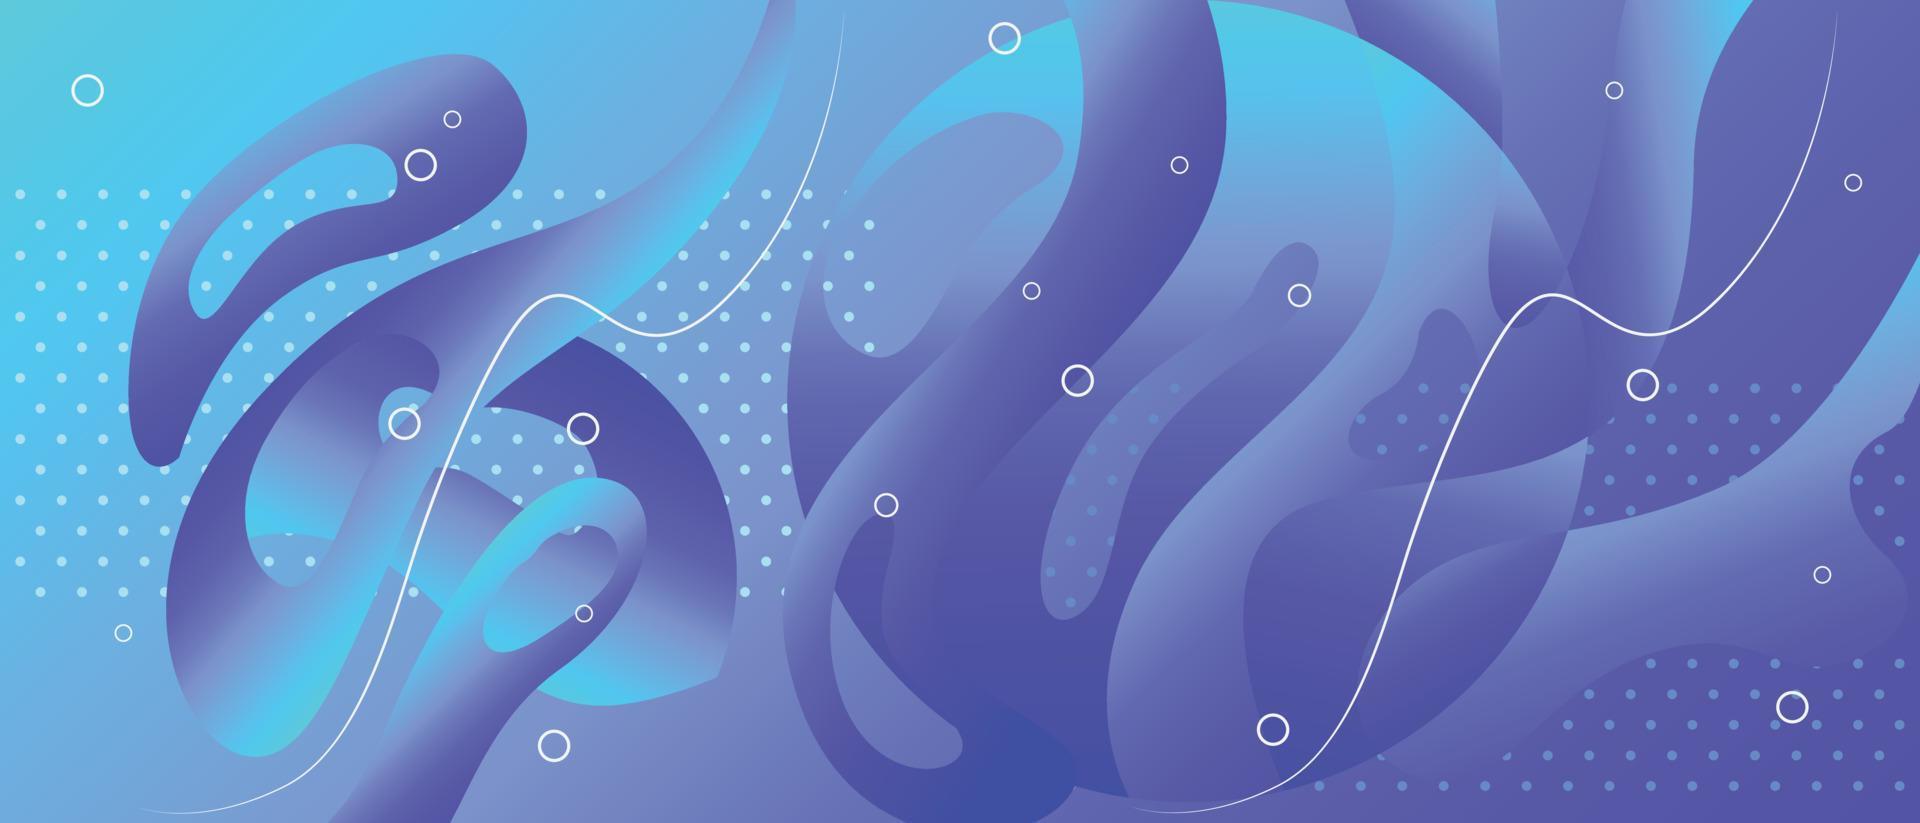 Abstract blue background design made of wavy shapes and circles. Vector illustration.